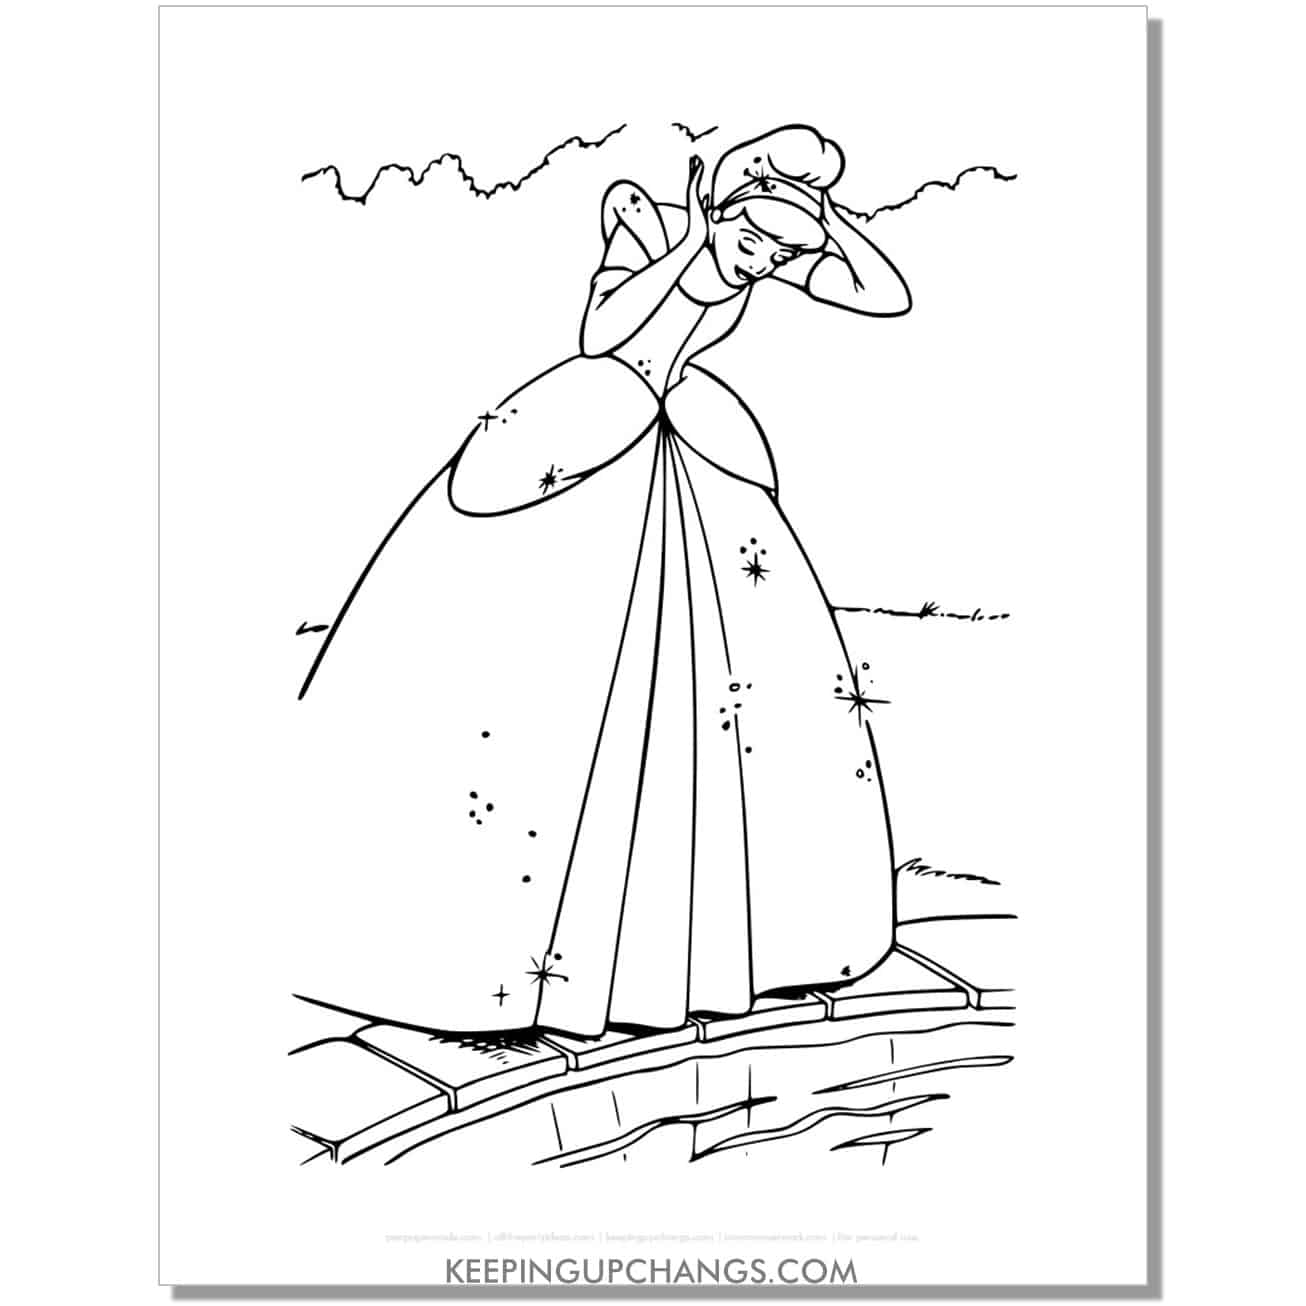 cinderella sees dress in reflection of water coloring page, sheet.